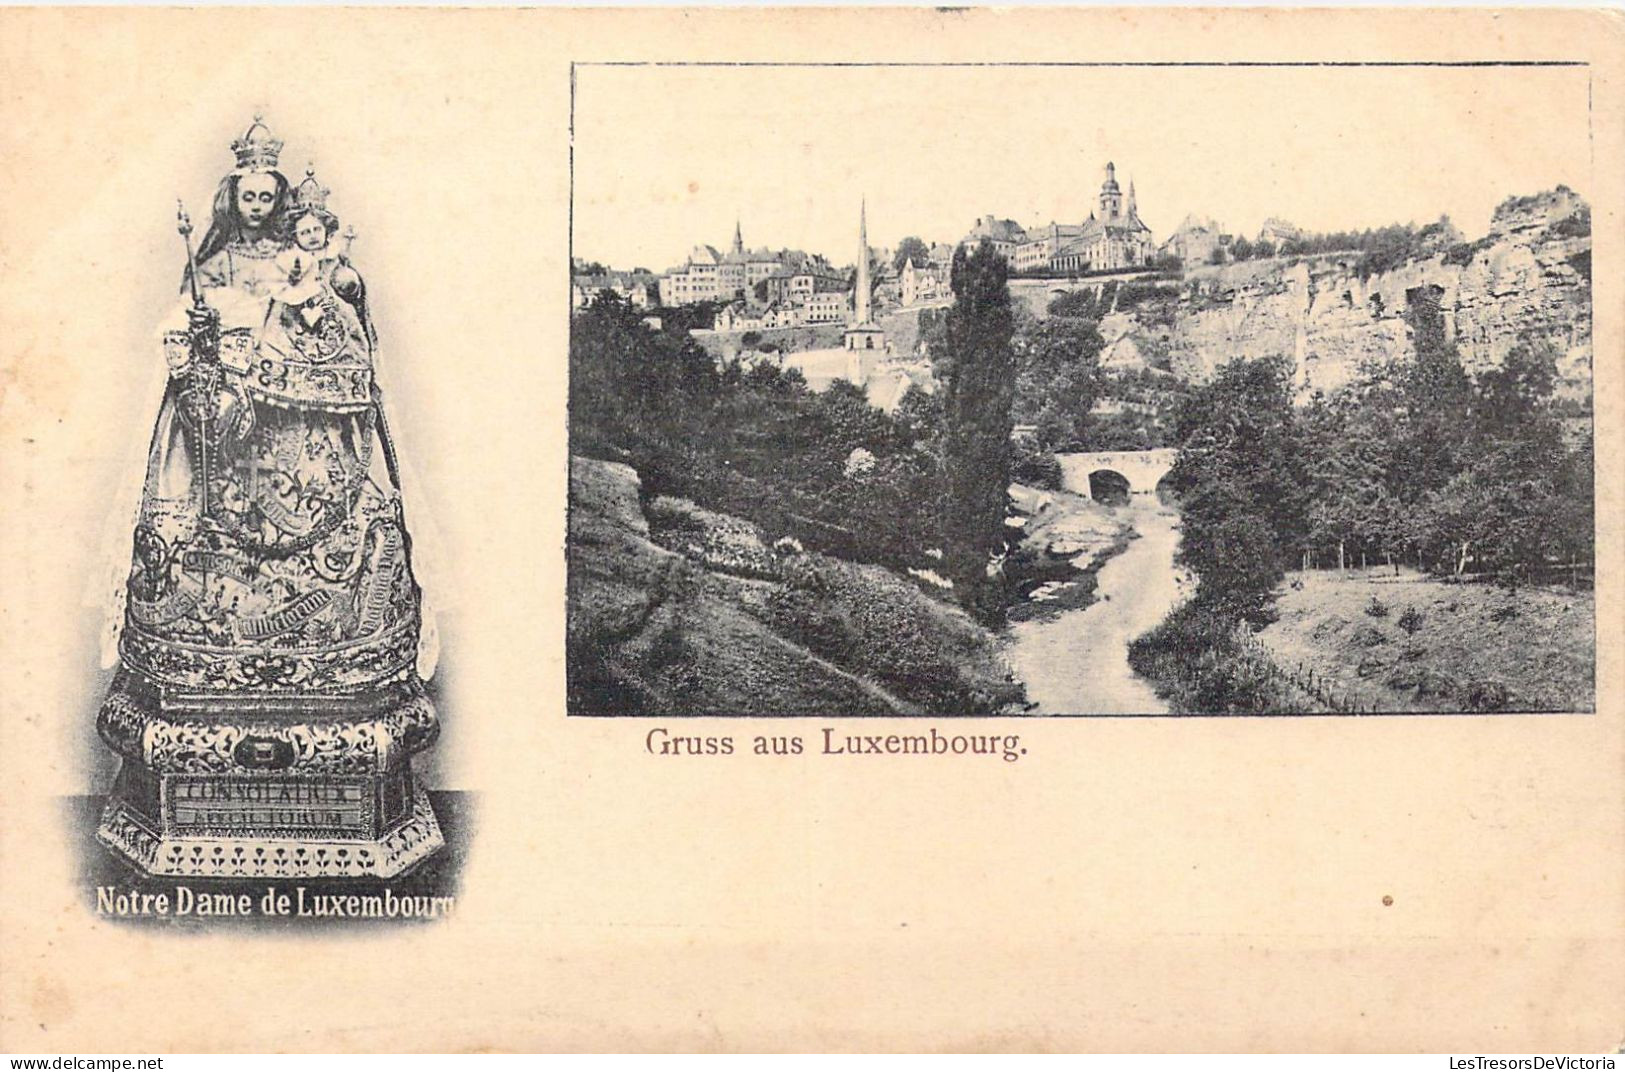 LUXEMBOURG - Gruss Aus Luxembourg - Notre Dame De Luxembourg - Carte Postale Ancienne - Luxemburg - Town